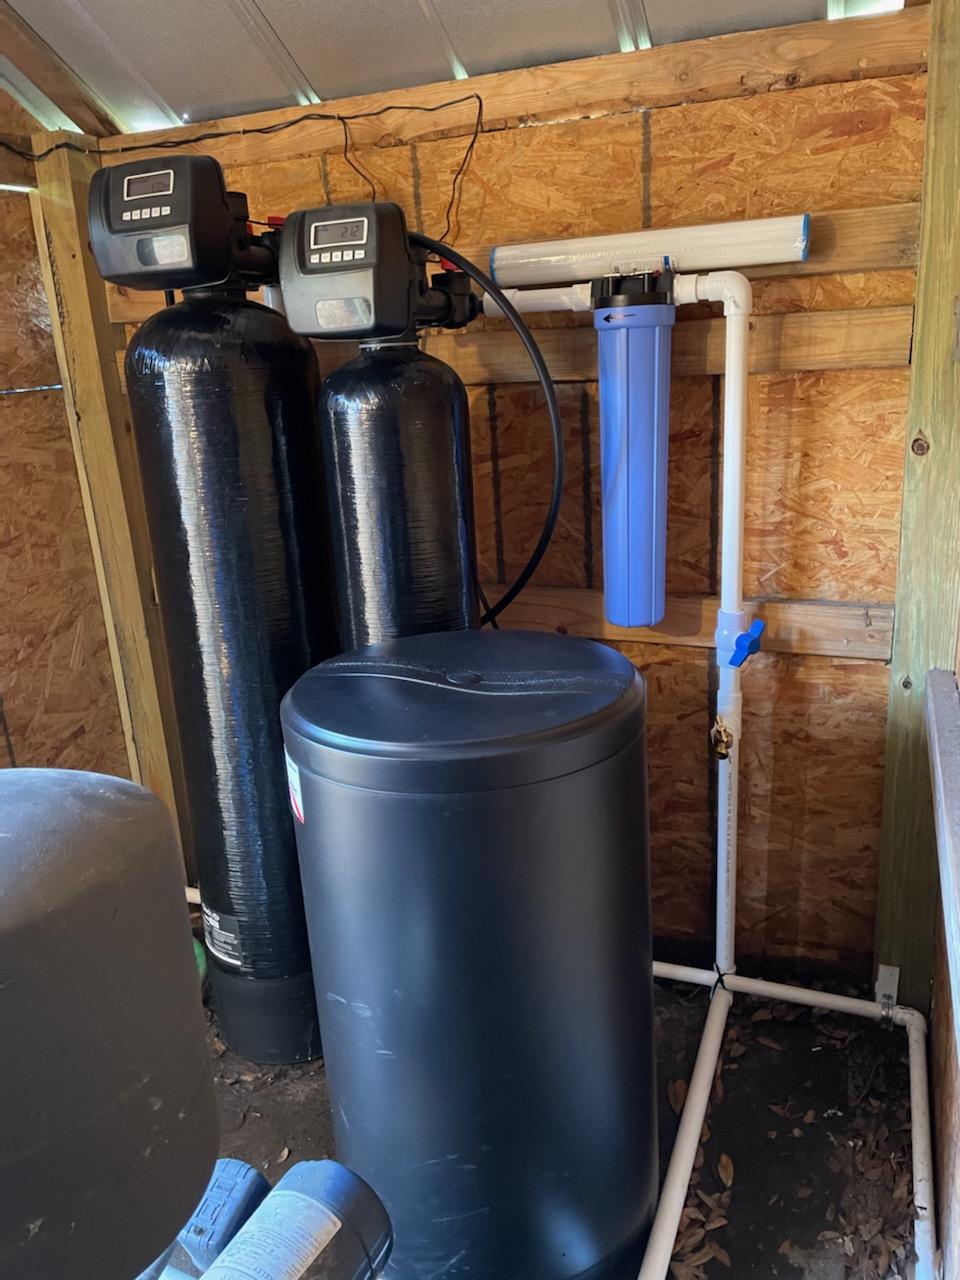 Awesome Water Treatment, Inc. | 200 Paseo Terraza #UNIT 205, St. Augustine, FL 32095 | Phone: (904) 679-8998